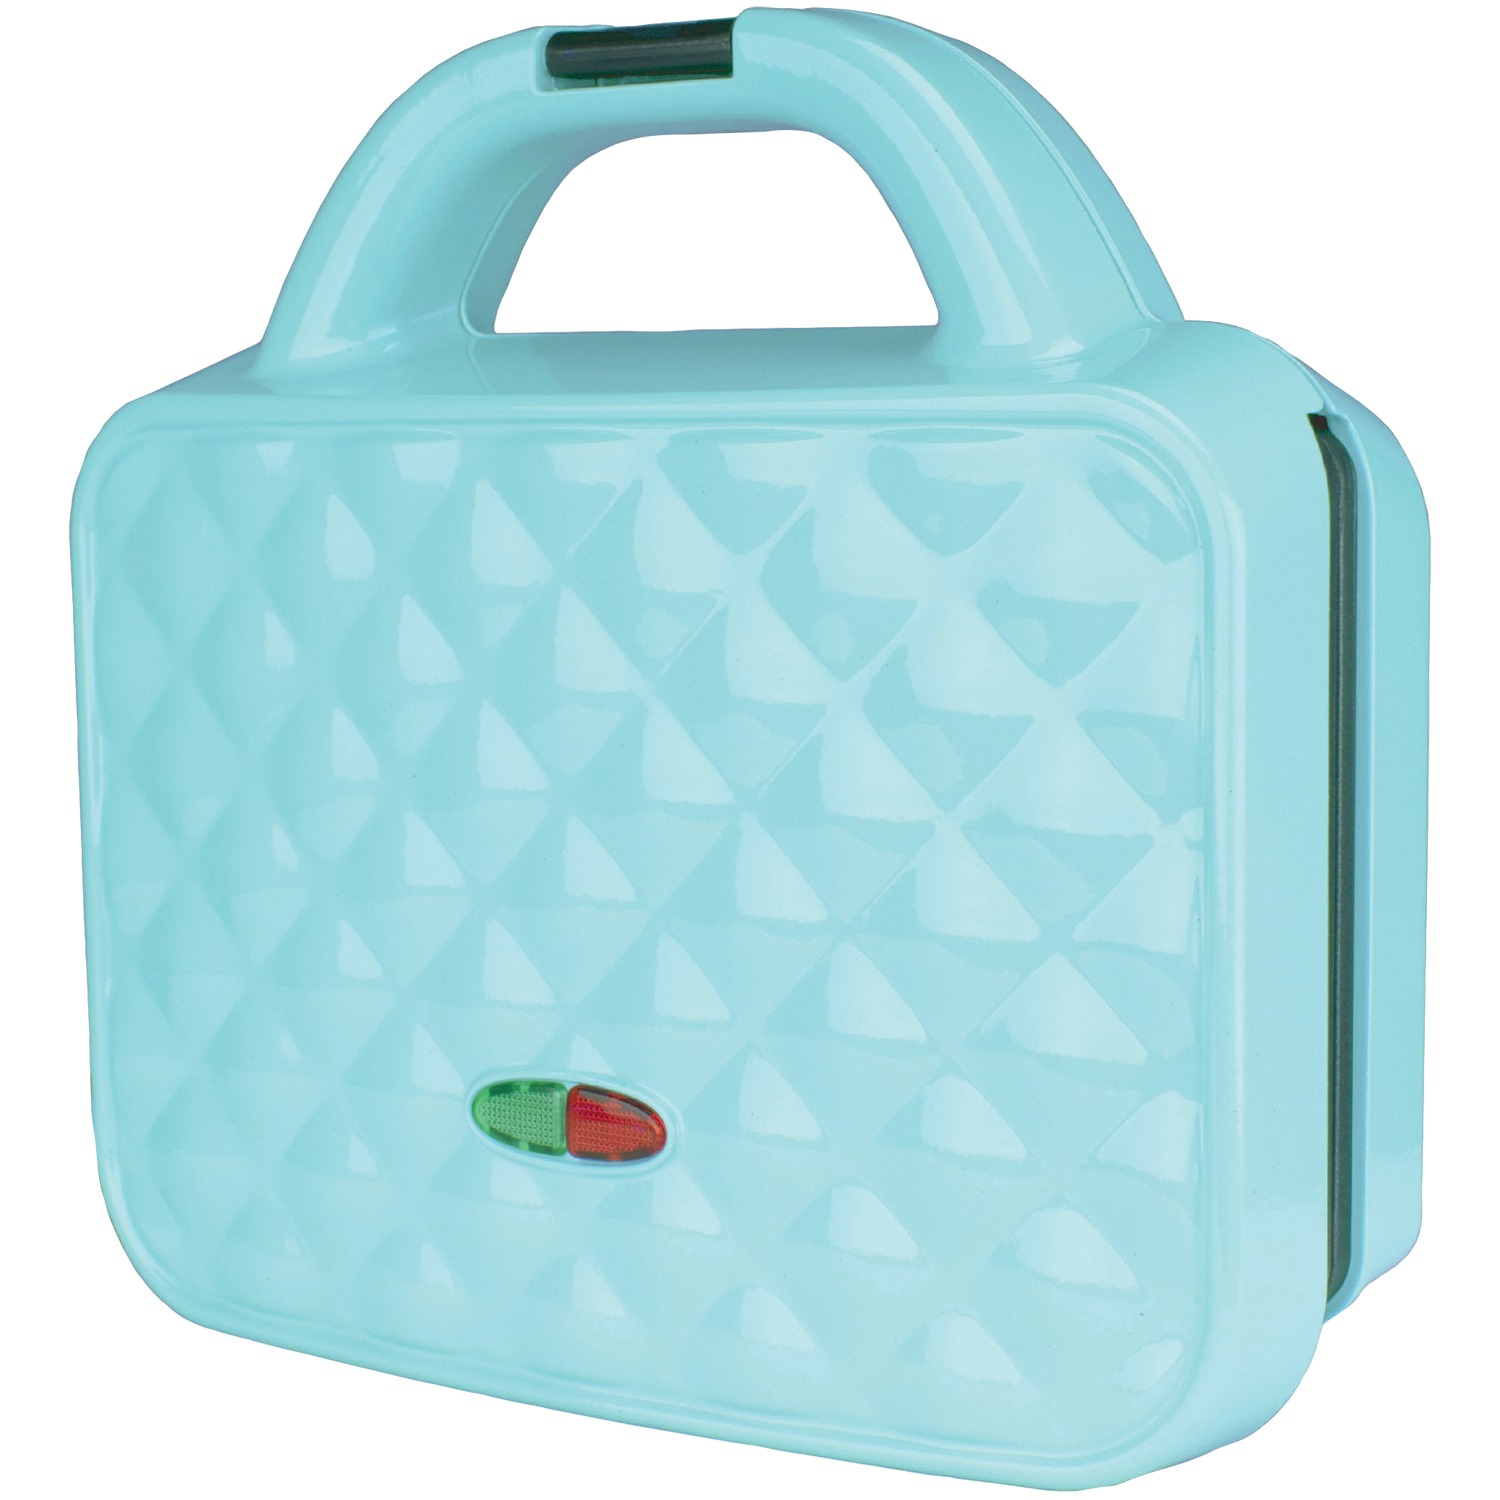 Brentwood Couture Purse Non-Stick Dual Waffle Maker in Blue with Indicator Lights - image 1 of 9